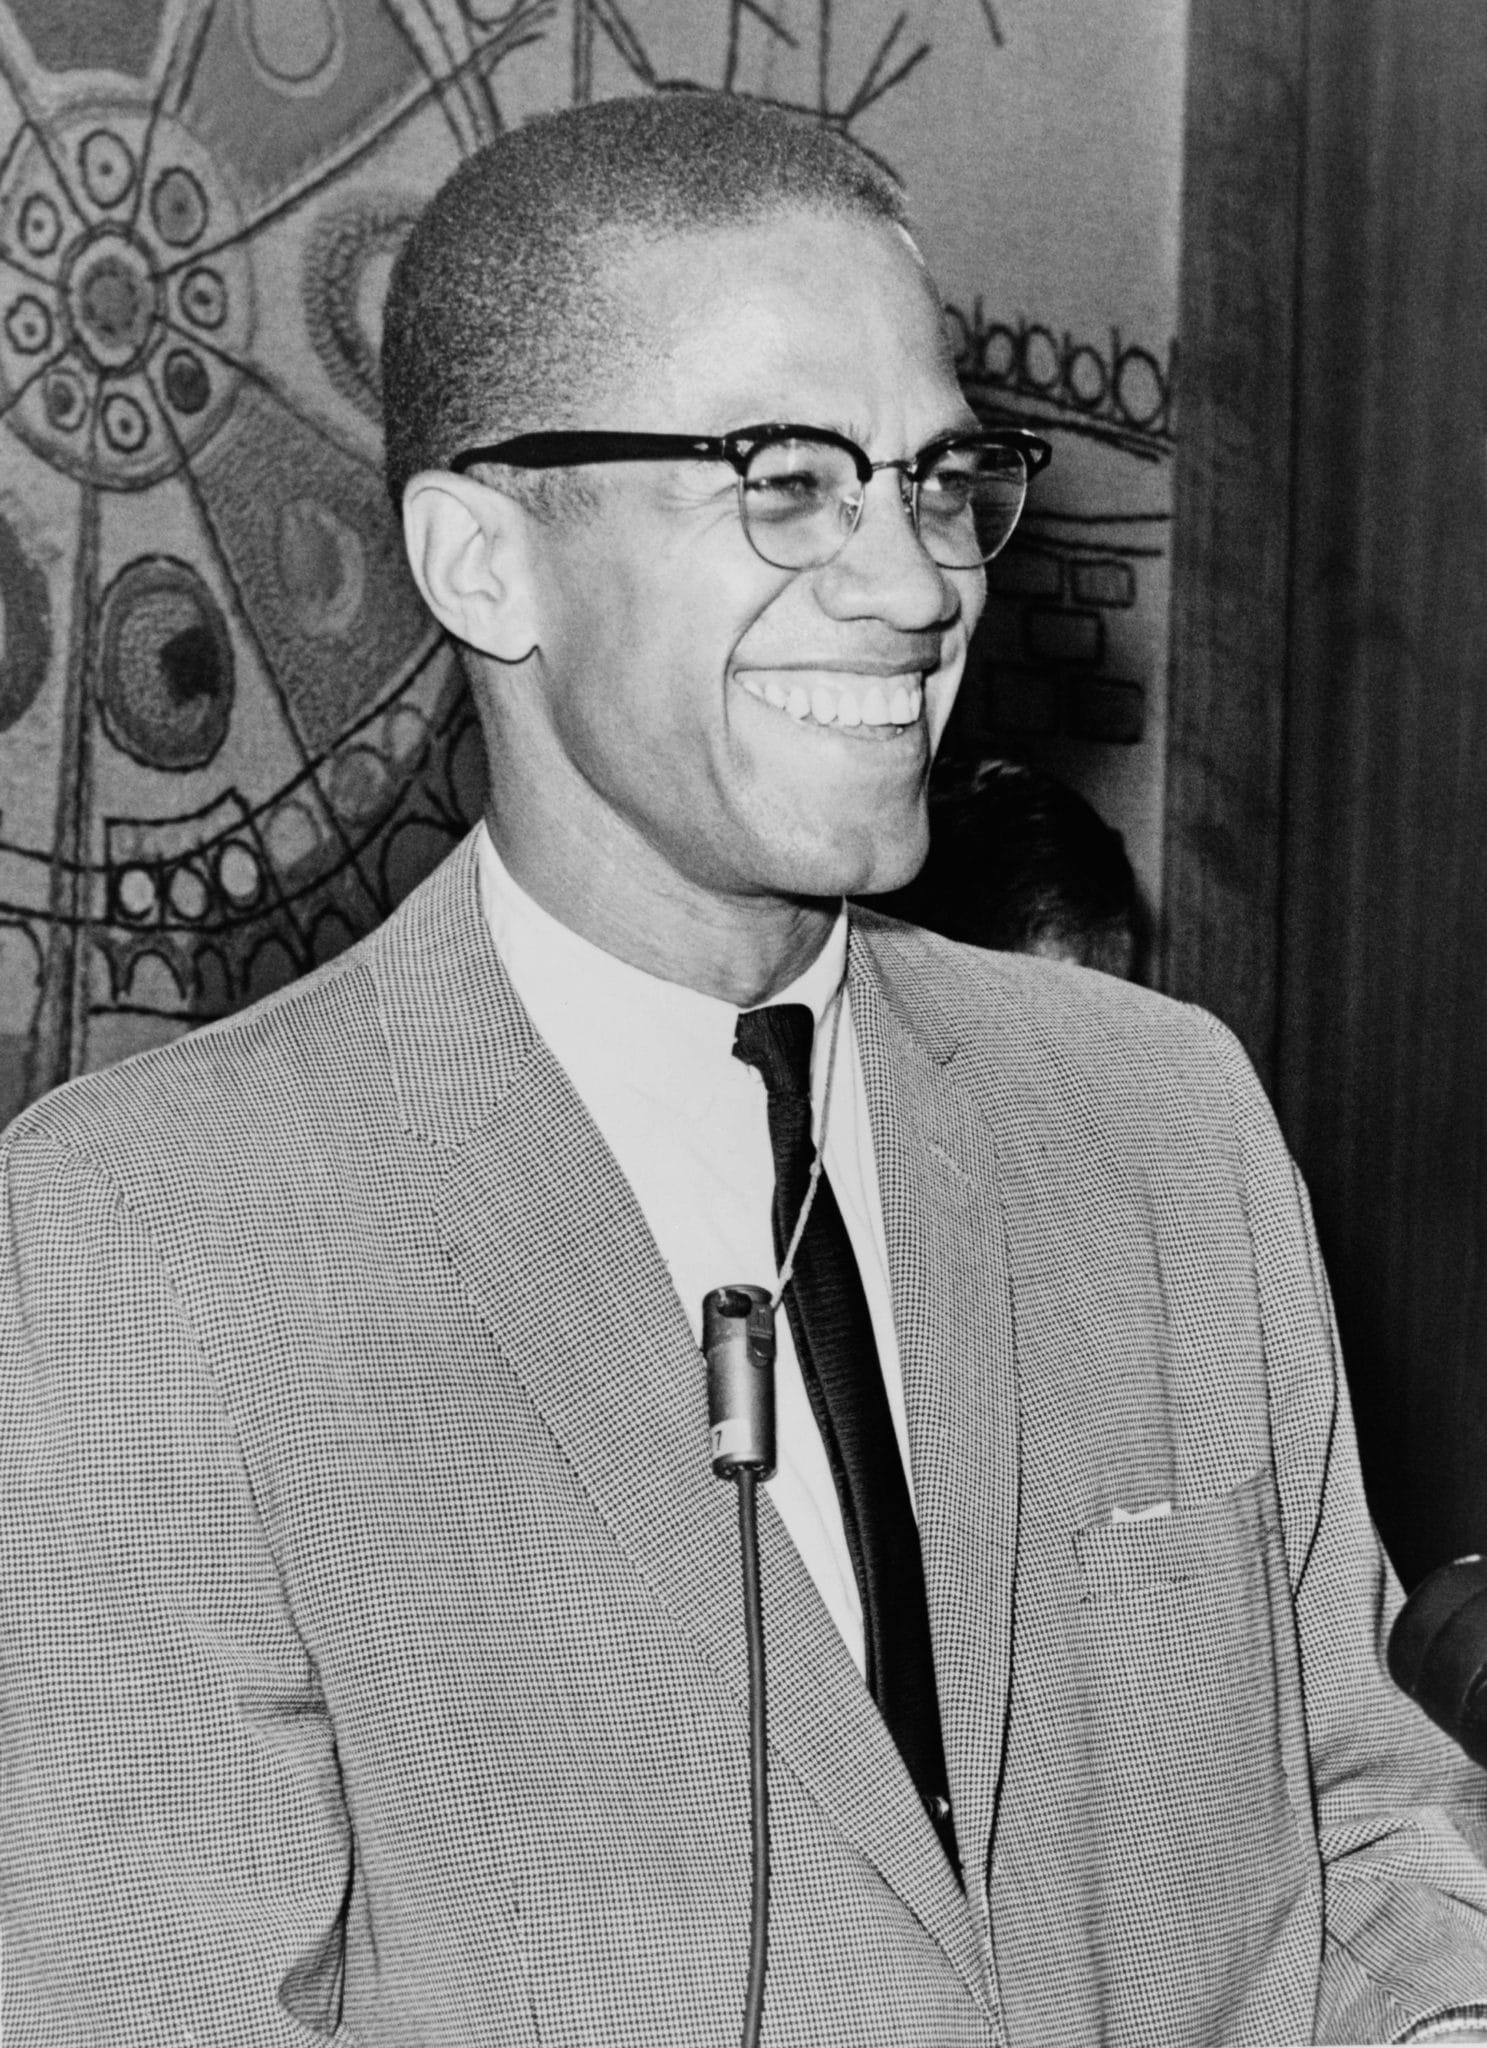 Prosecutor, FBI, Police Misconduct leads to Exonerations in Malcolm X Murder